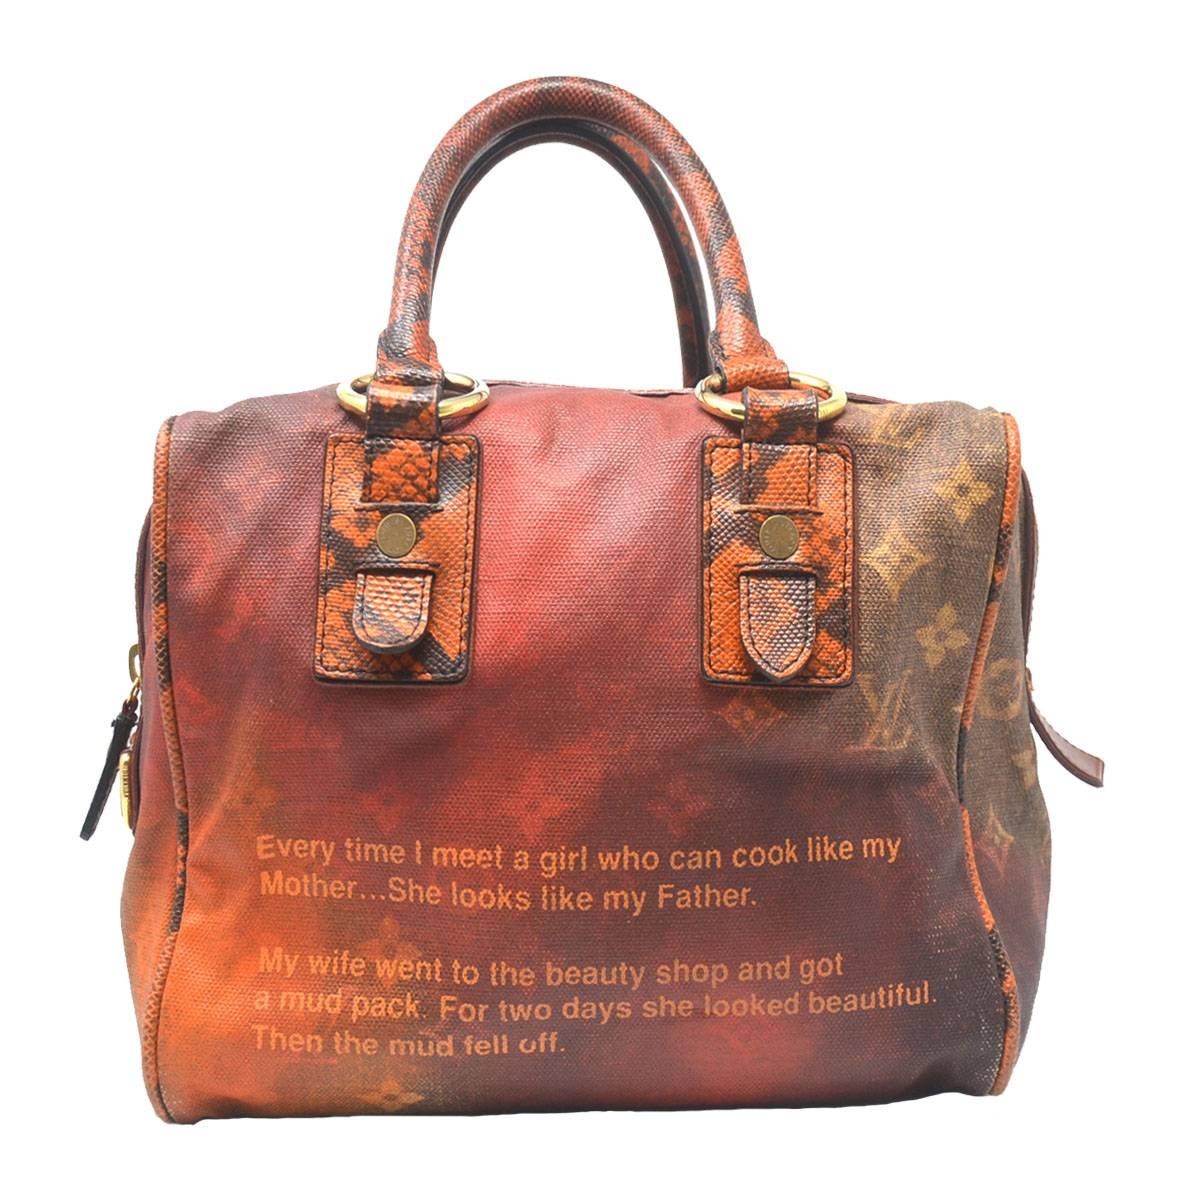 Company-Louis Vuitton
Model-Richard Prince MANCRAZY Printemps Jokes 2008 Collection
Color-Red/Orange
Date Code-FL1008
Material-Leather with Snakeskin on leather trim
Measurements-11.2